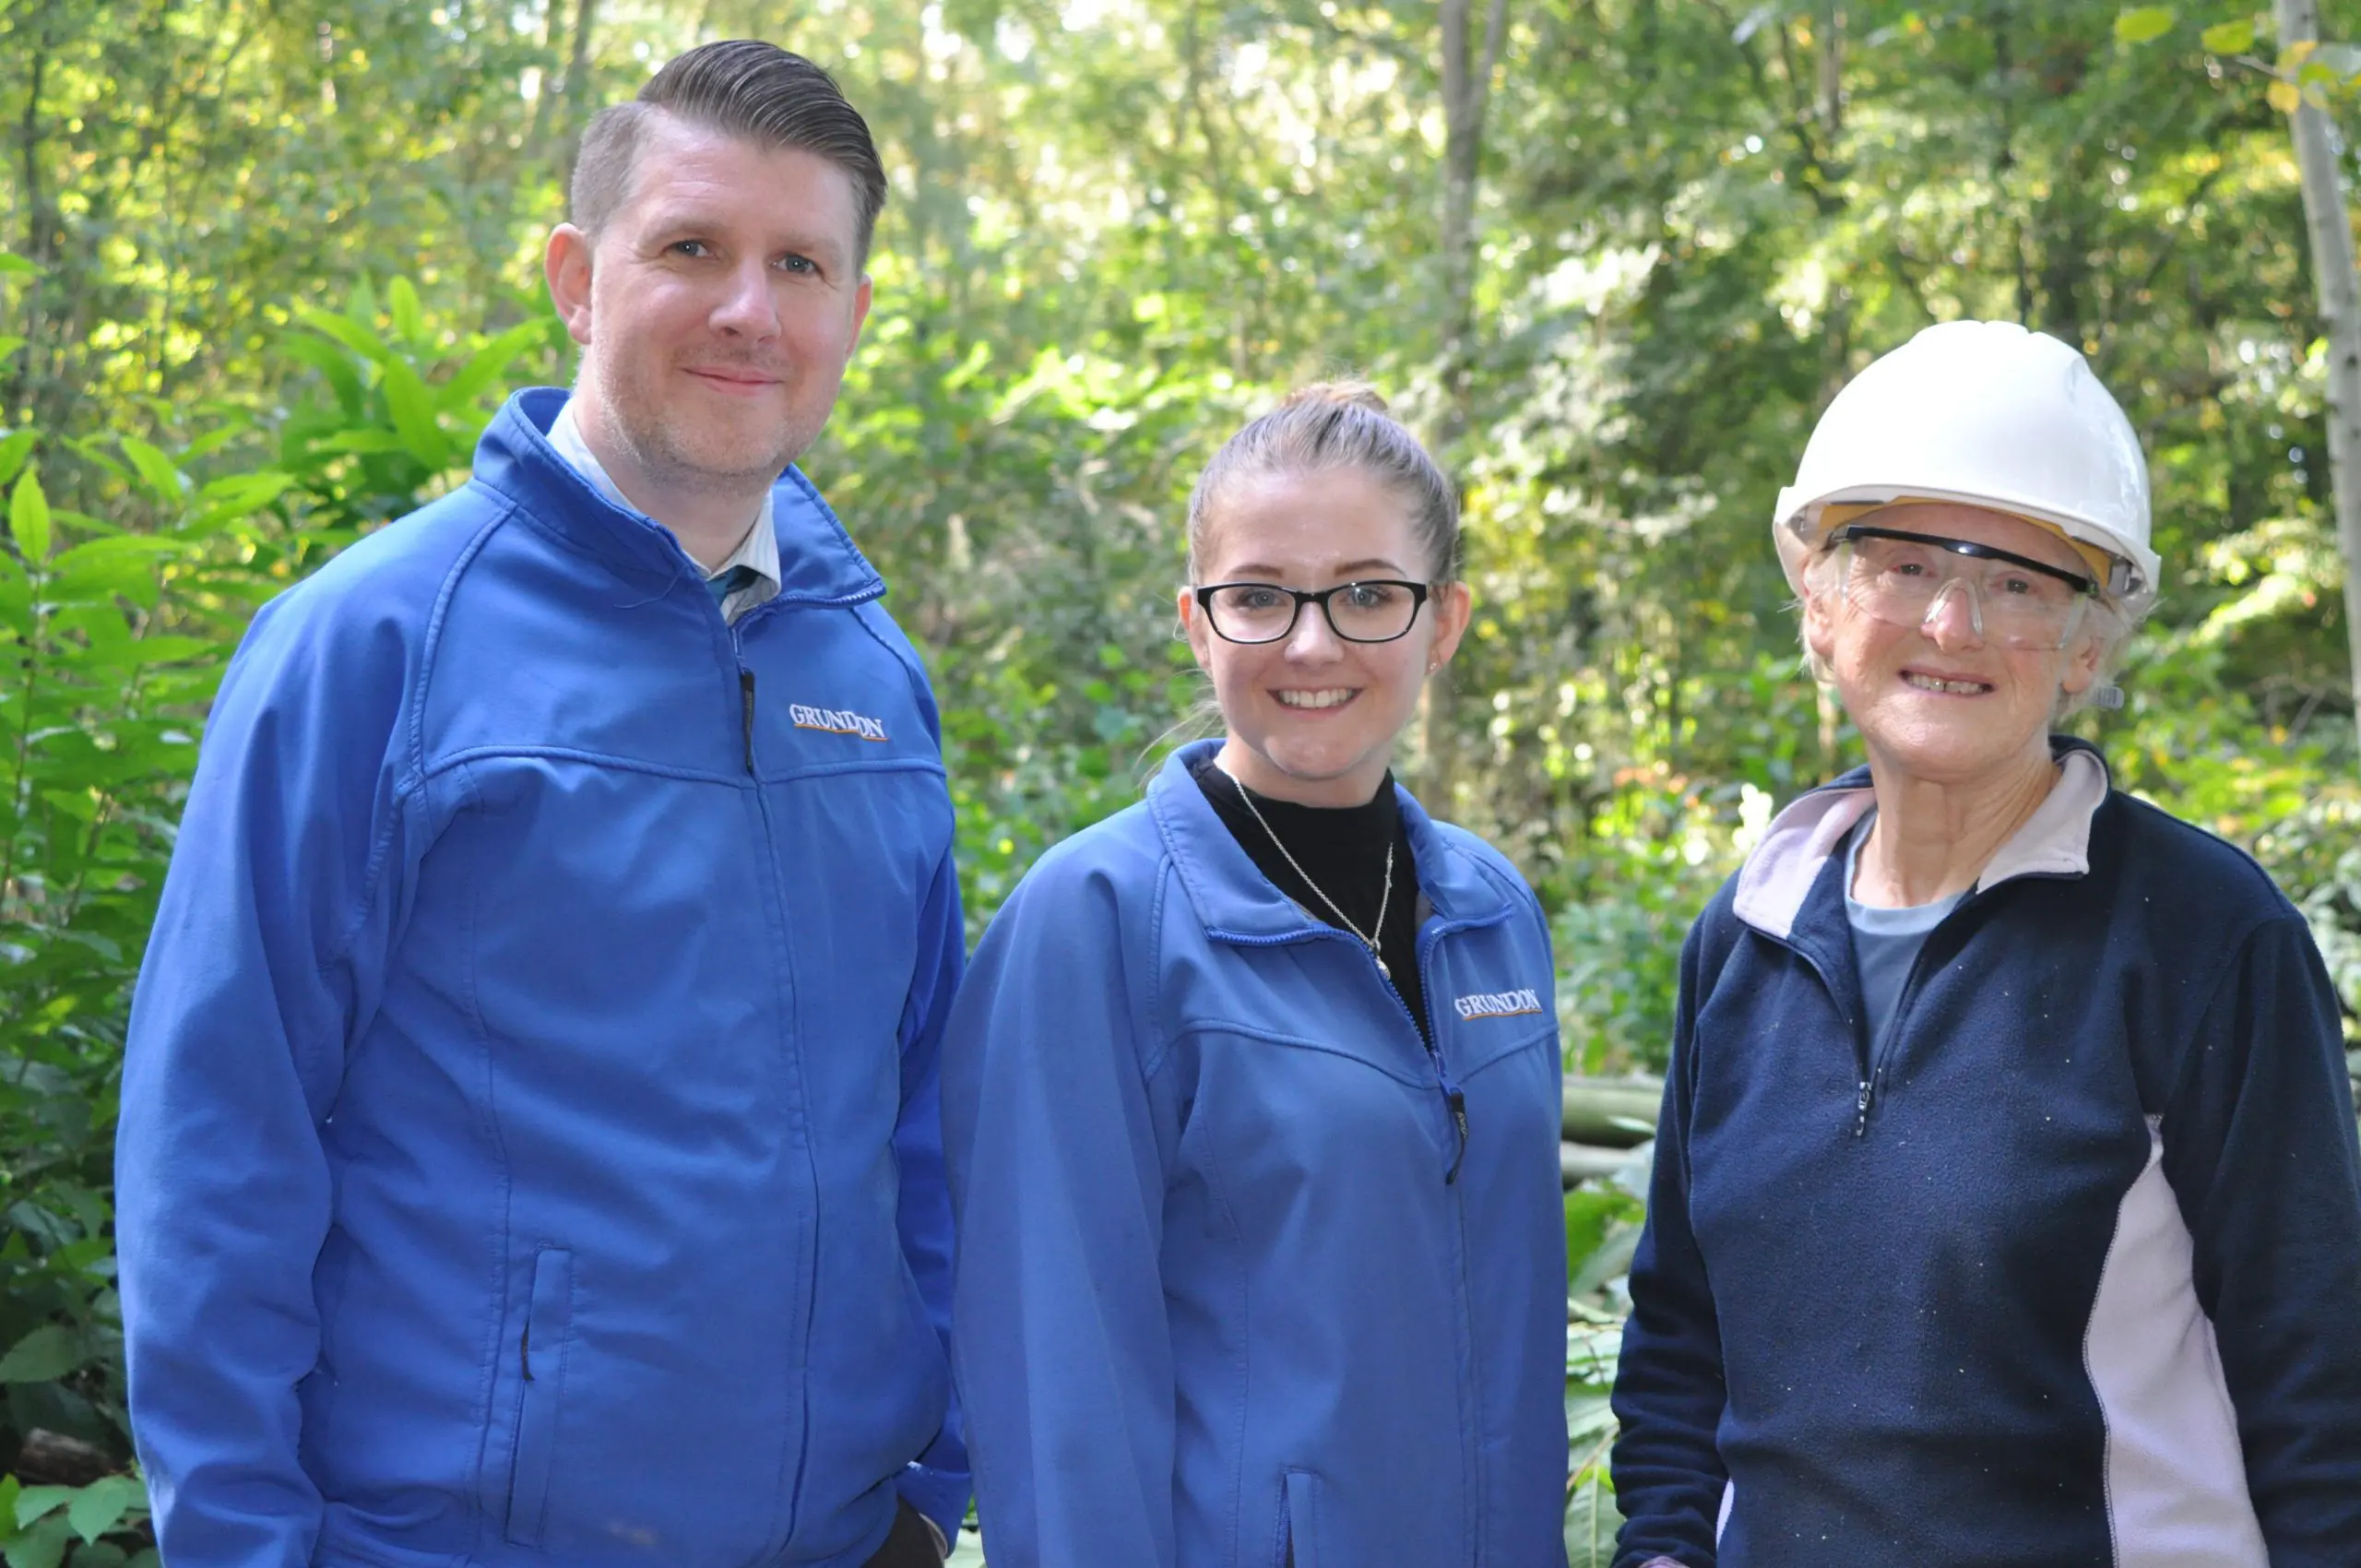 Grundon's Head of Marketing and Communications, Anthony Foxlee-Brown and Kirsti Santer, Marketing Campaigns Co-ordinator, joined the volunteers at Collin Park Wood Nature Reserve in Redmarley to see what improvements were being made to benefit both local wildlife and the Reserve's visitors.